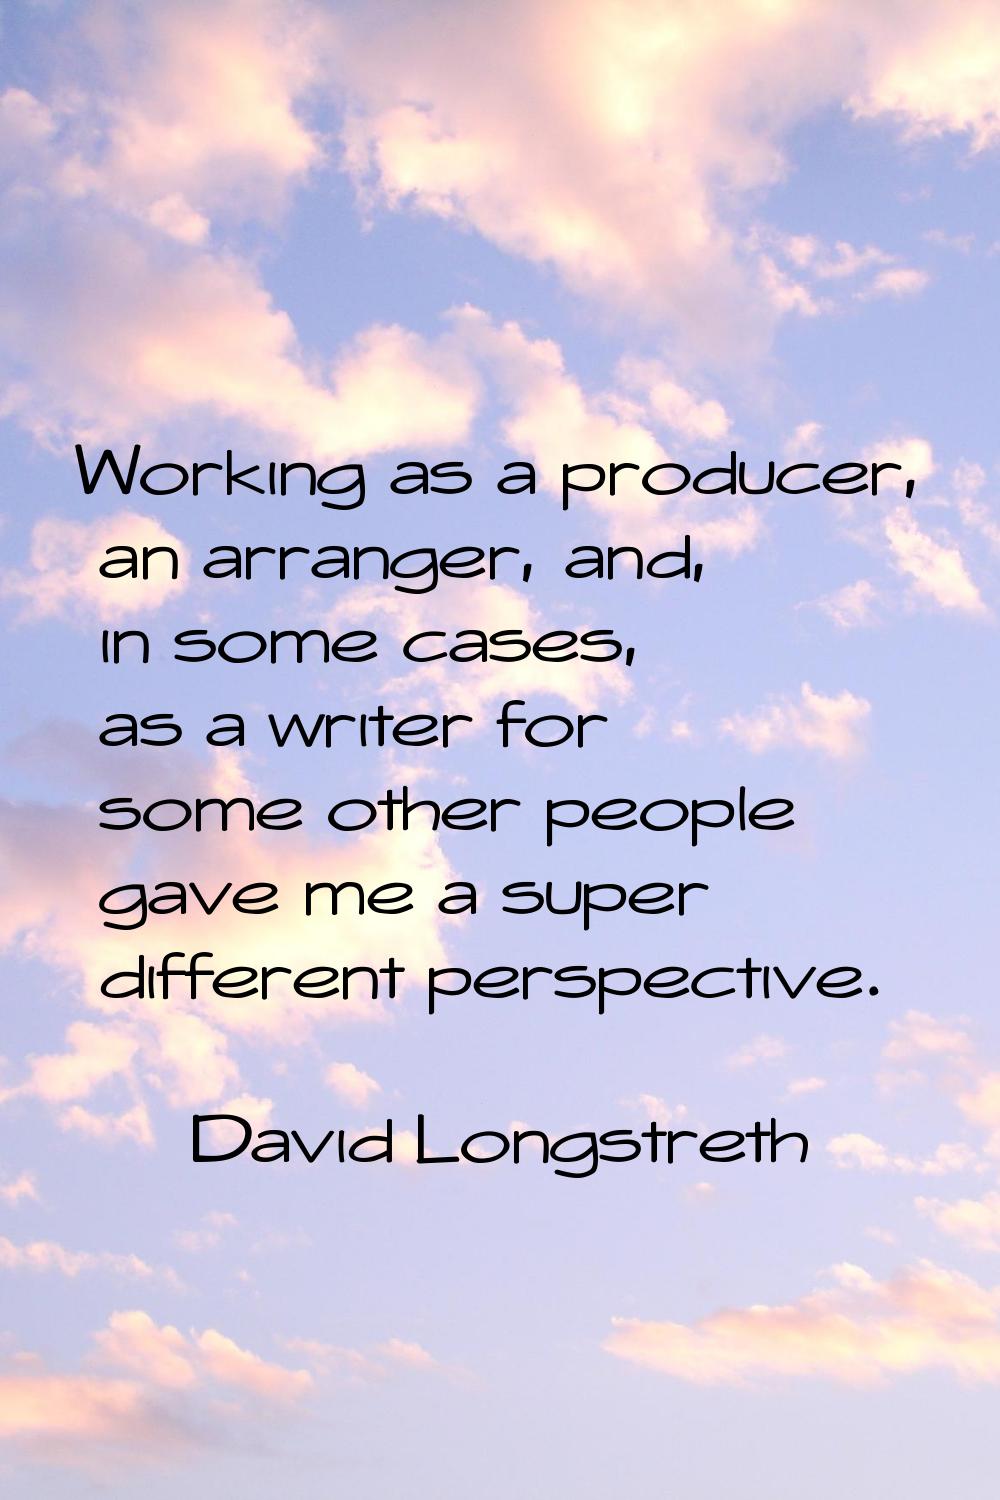 Working as a producer, an arranger, and, in some cases, as a writer for some other people gave me a